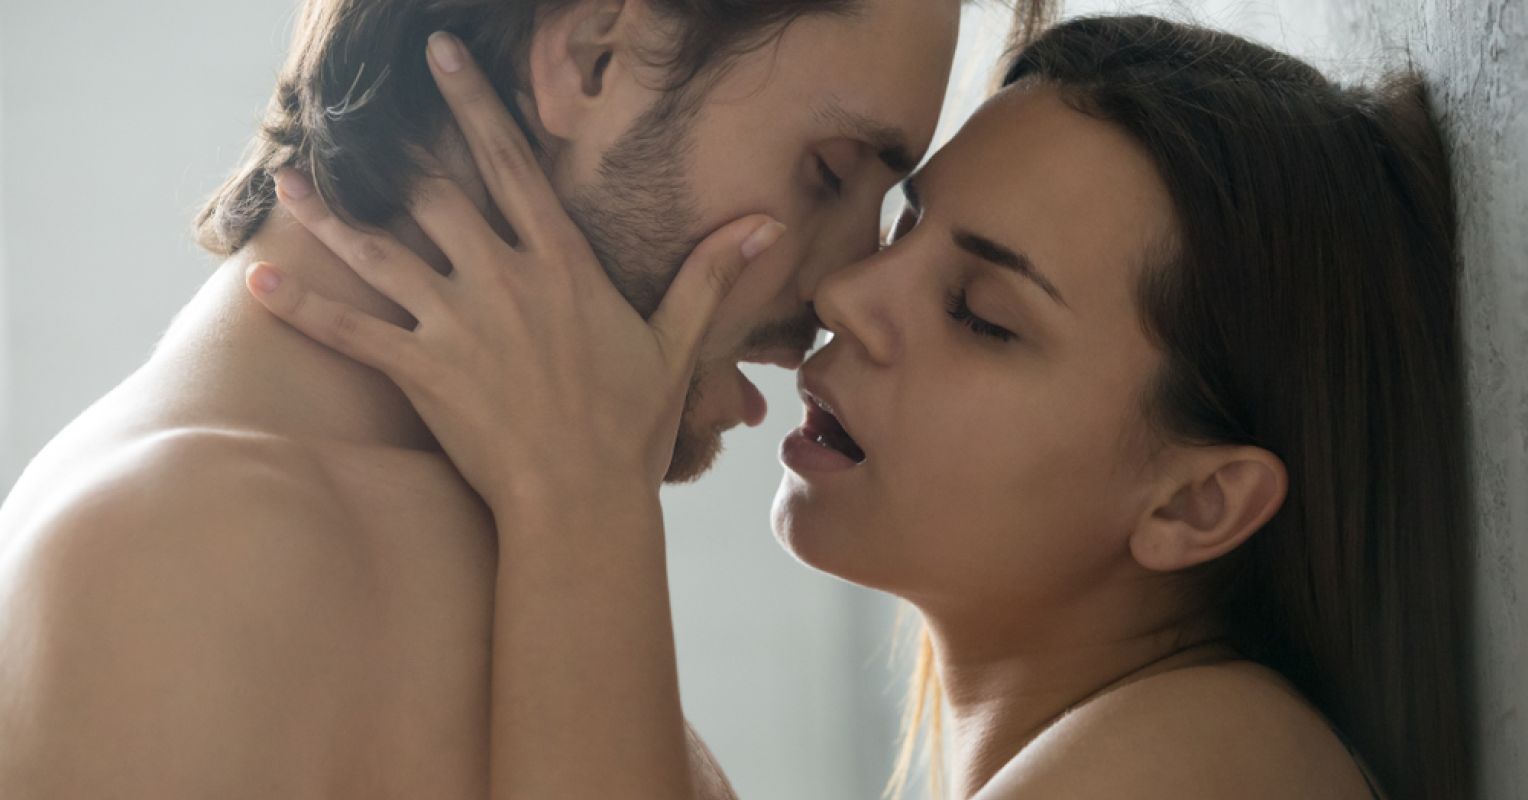 1528px x 800px - Why We Scream and Moan During Sex | Psychology Today